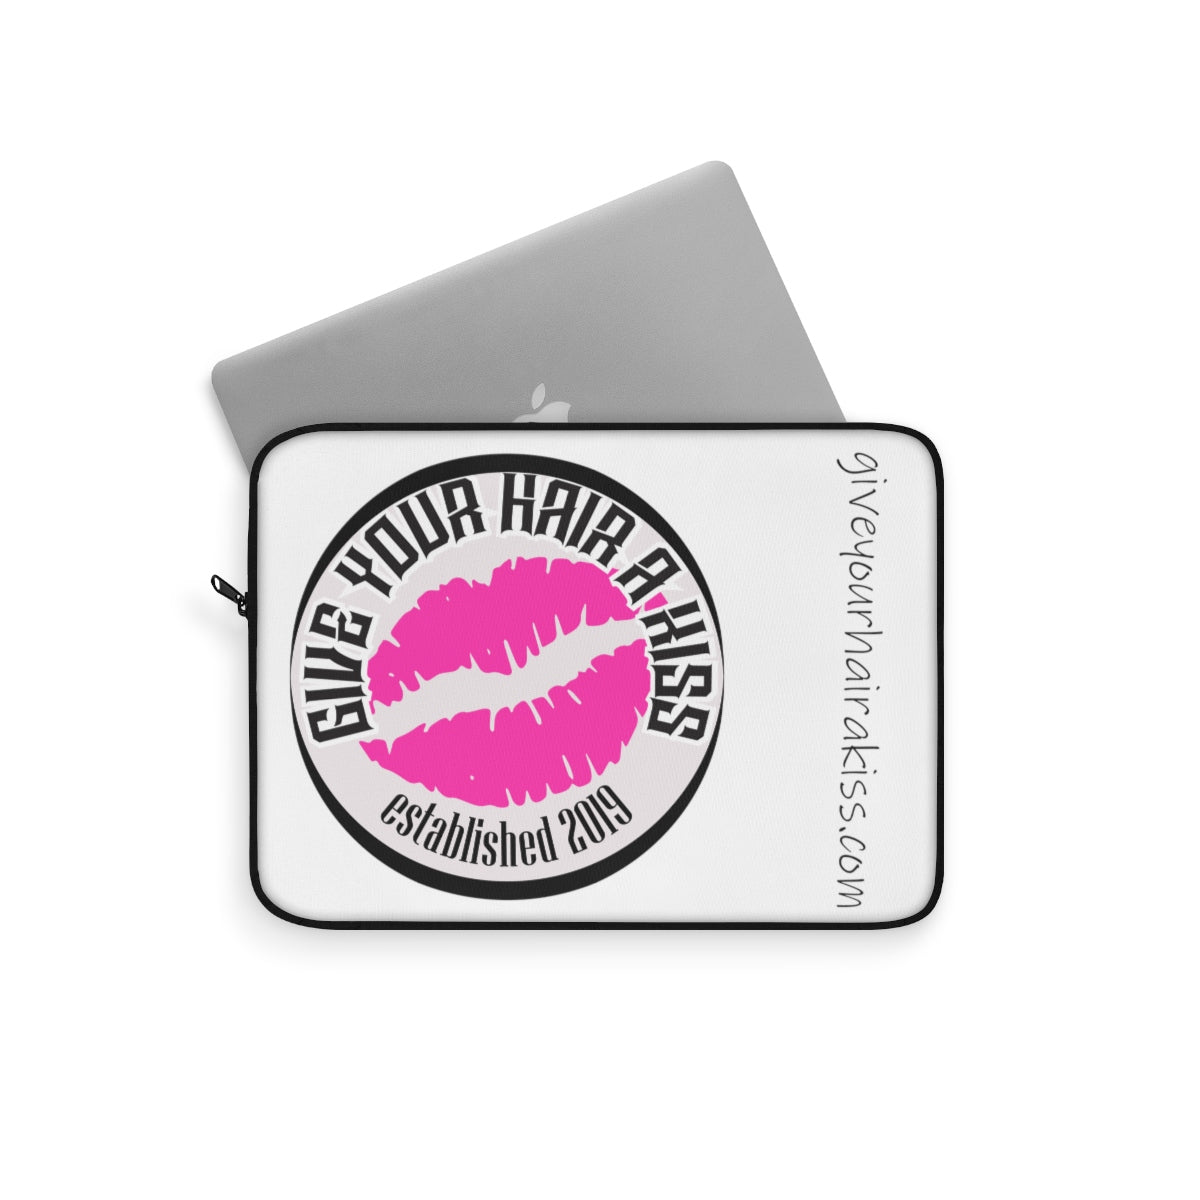 Laptop Sleeve - Give Your Hair a Kiss